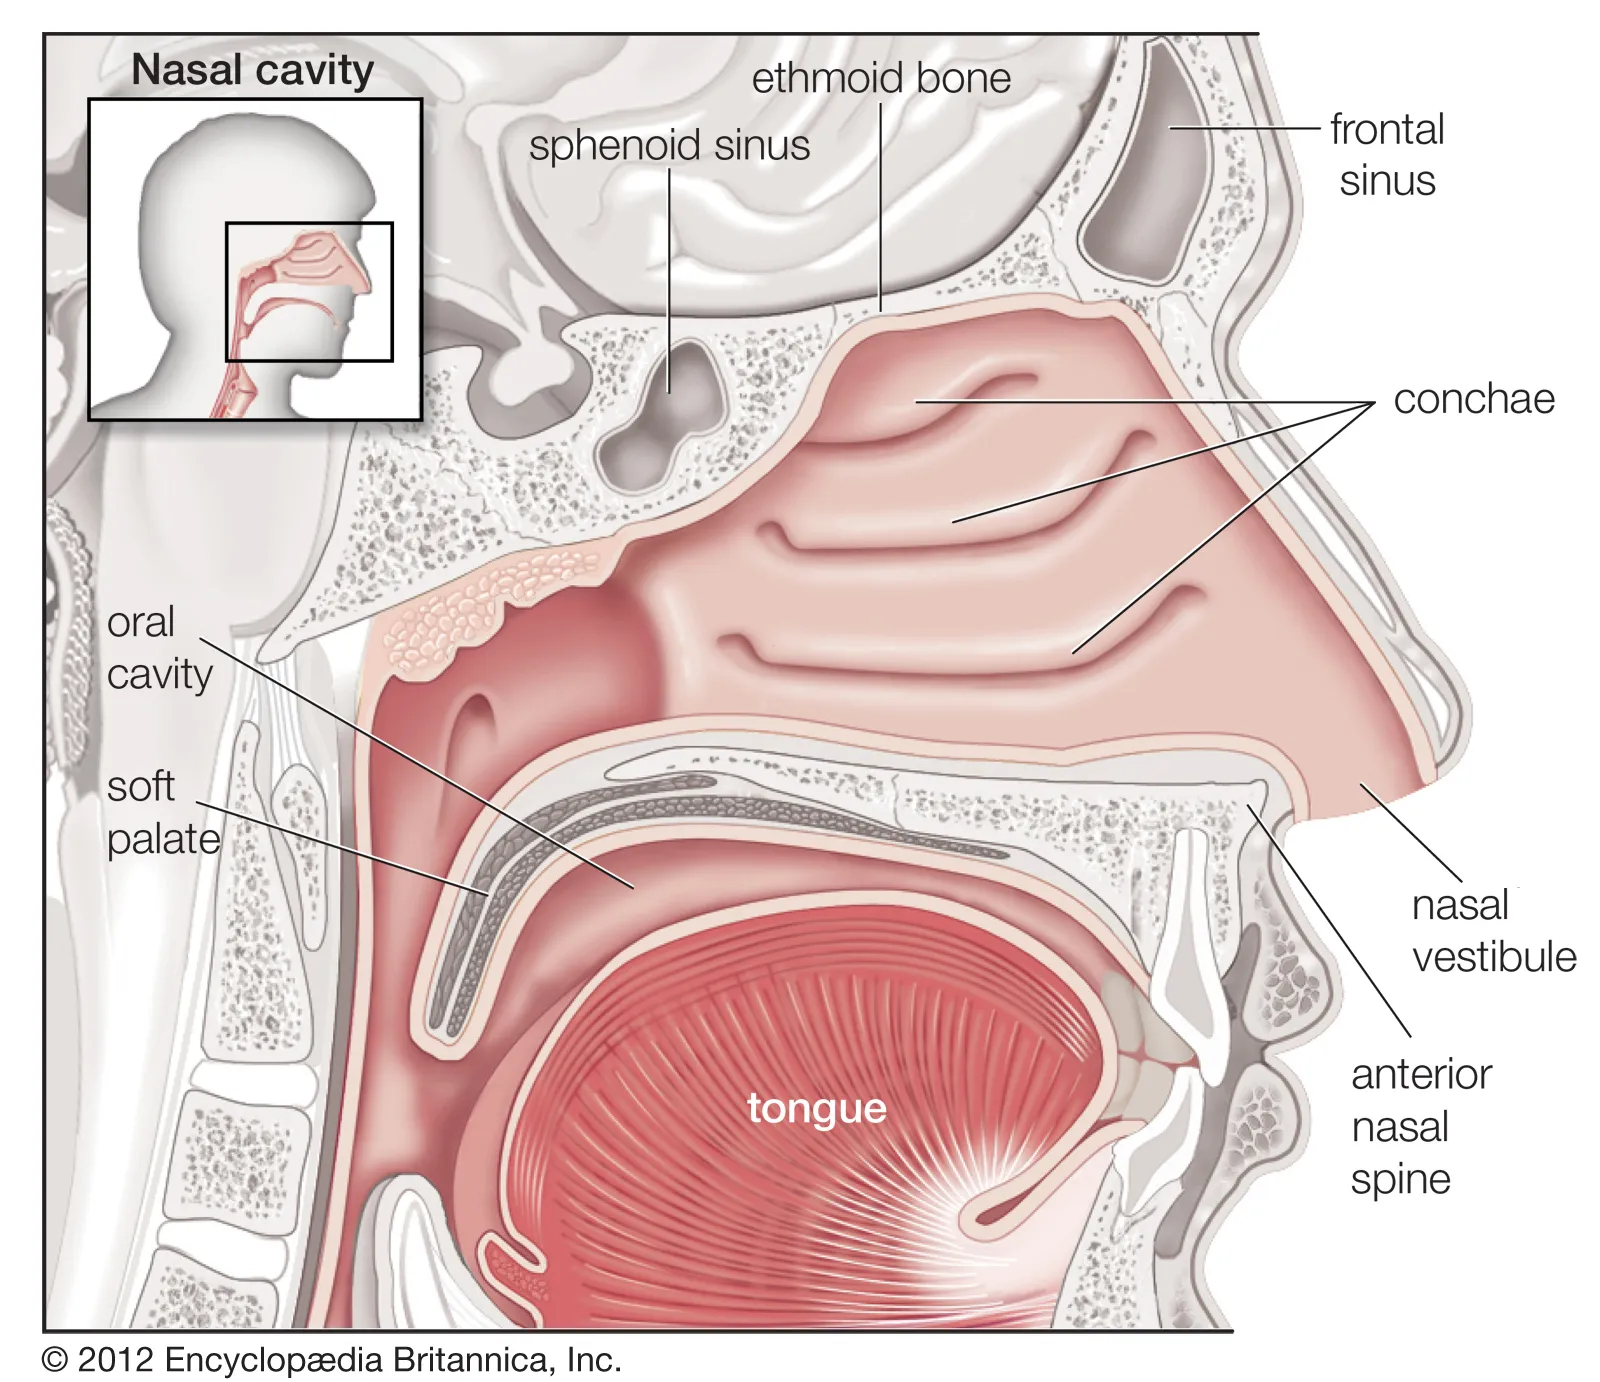 <p>The nasal cavity is lined with mucosa, except for the nasal vestibule, which is lined with skin.</p>